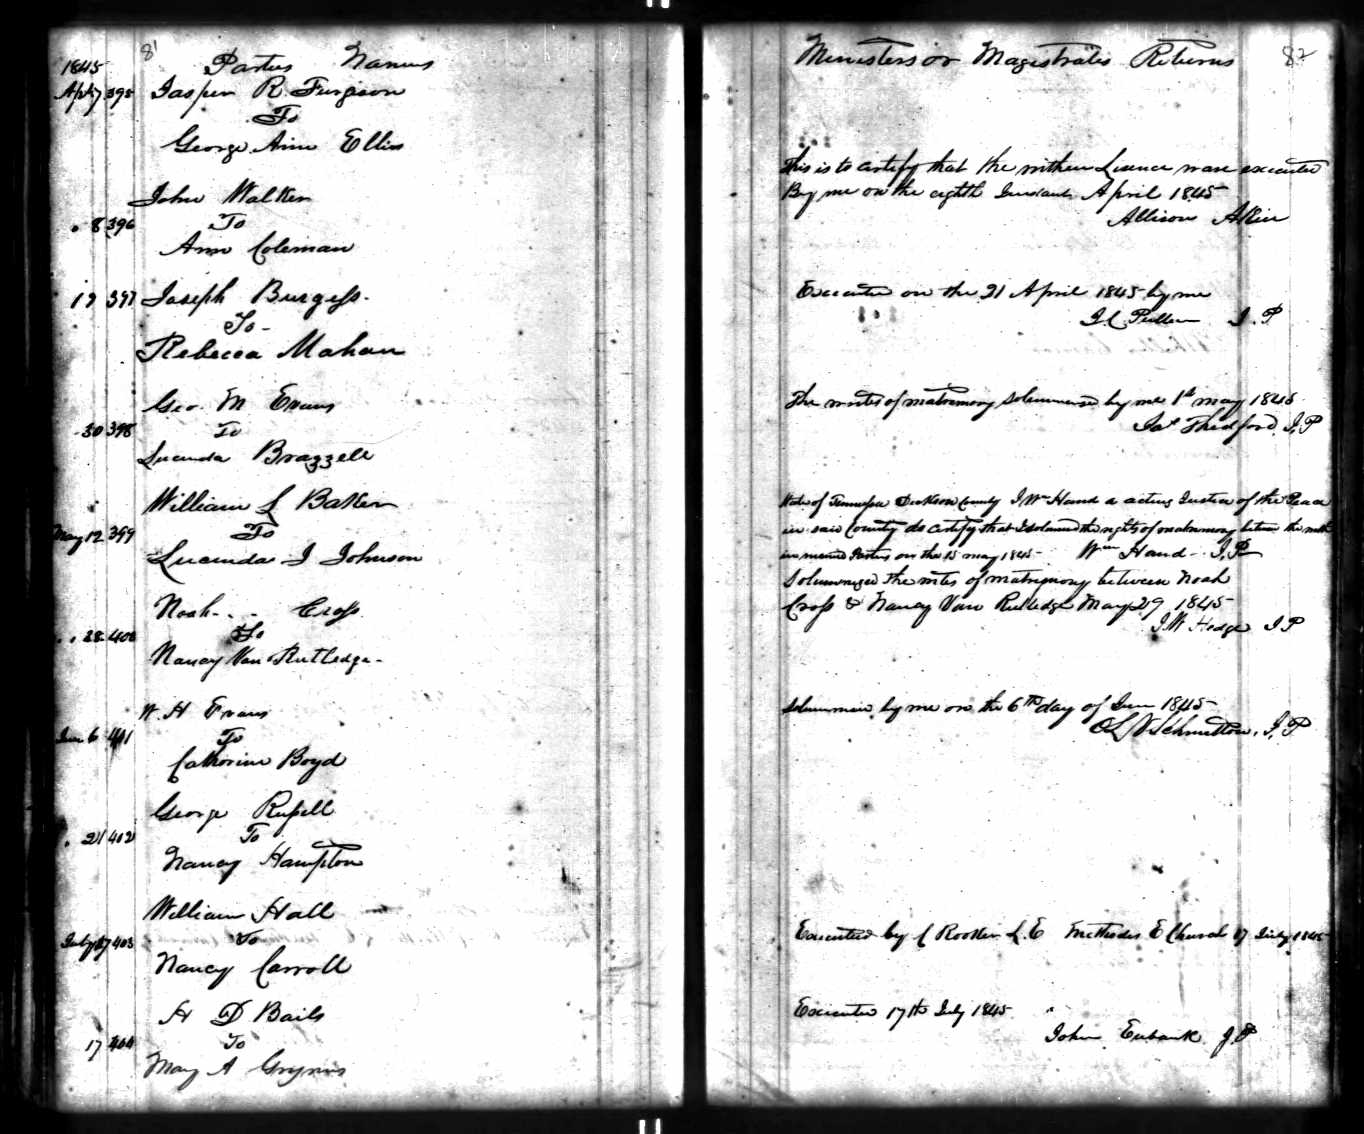 Lucinda Brazzell marriage to George M. Evans, 1845, Dickson County, Tennessee